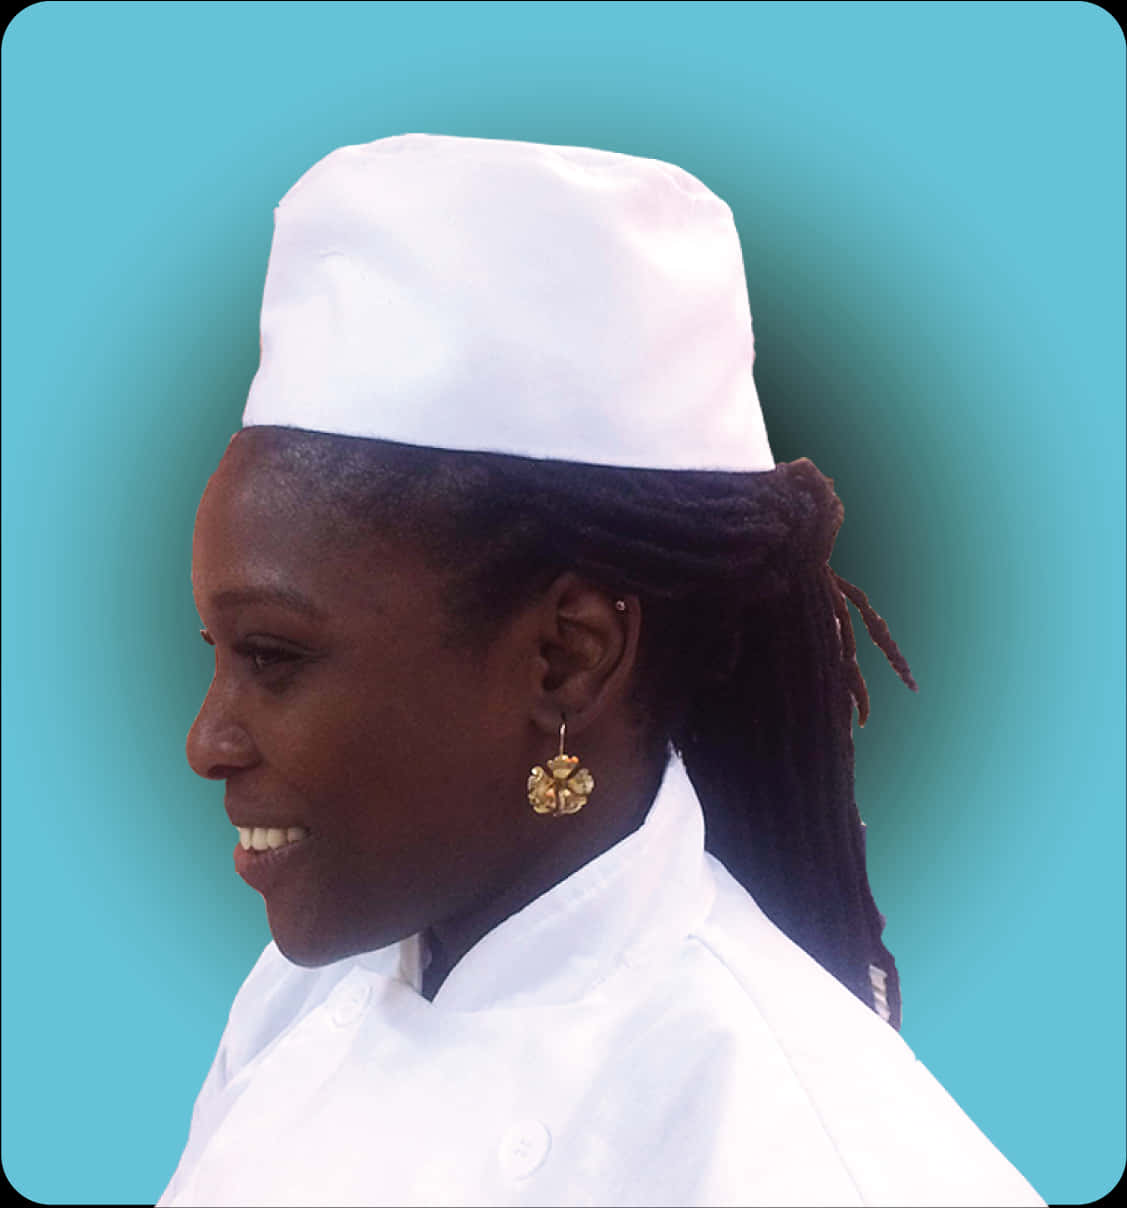 A Woman Wearing A White Hat And A White Coat